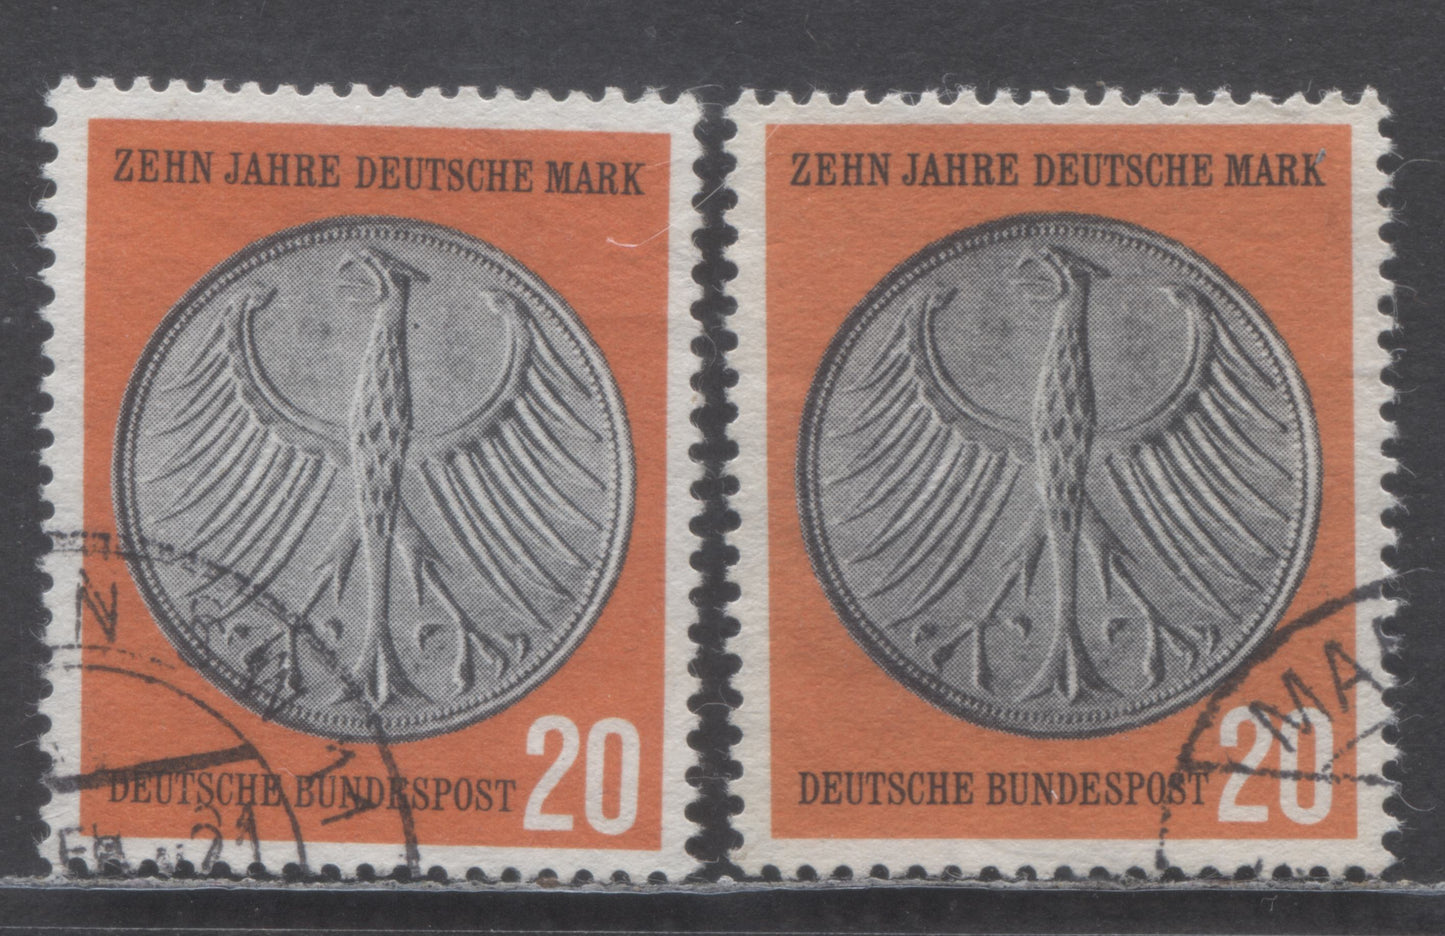 Lot 68 Germany Mi#291III (SC# 787) 20pf Red & Black 1958 German Currency Reform Issue, With Black Dot Beside Neck Variety From Pos. 42, 2 Very Fine Used Singles, Click on Listing to See ALL Pictures, Estimated Value $20